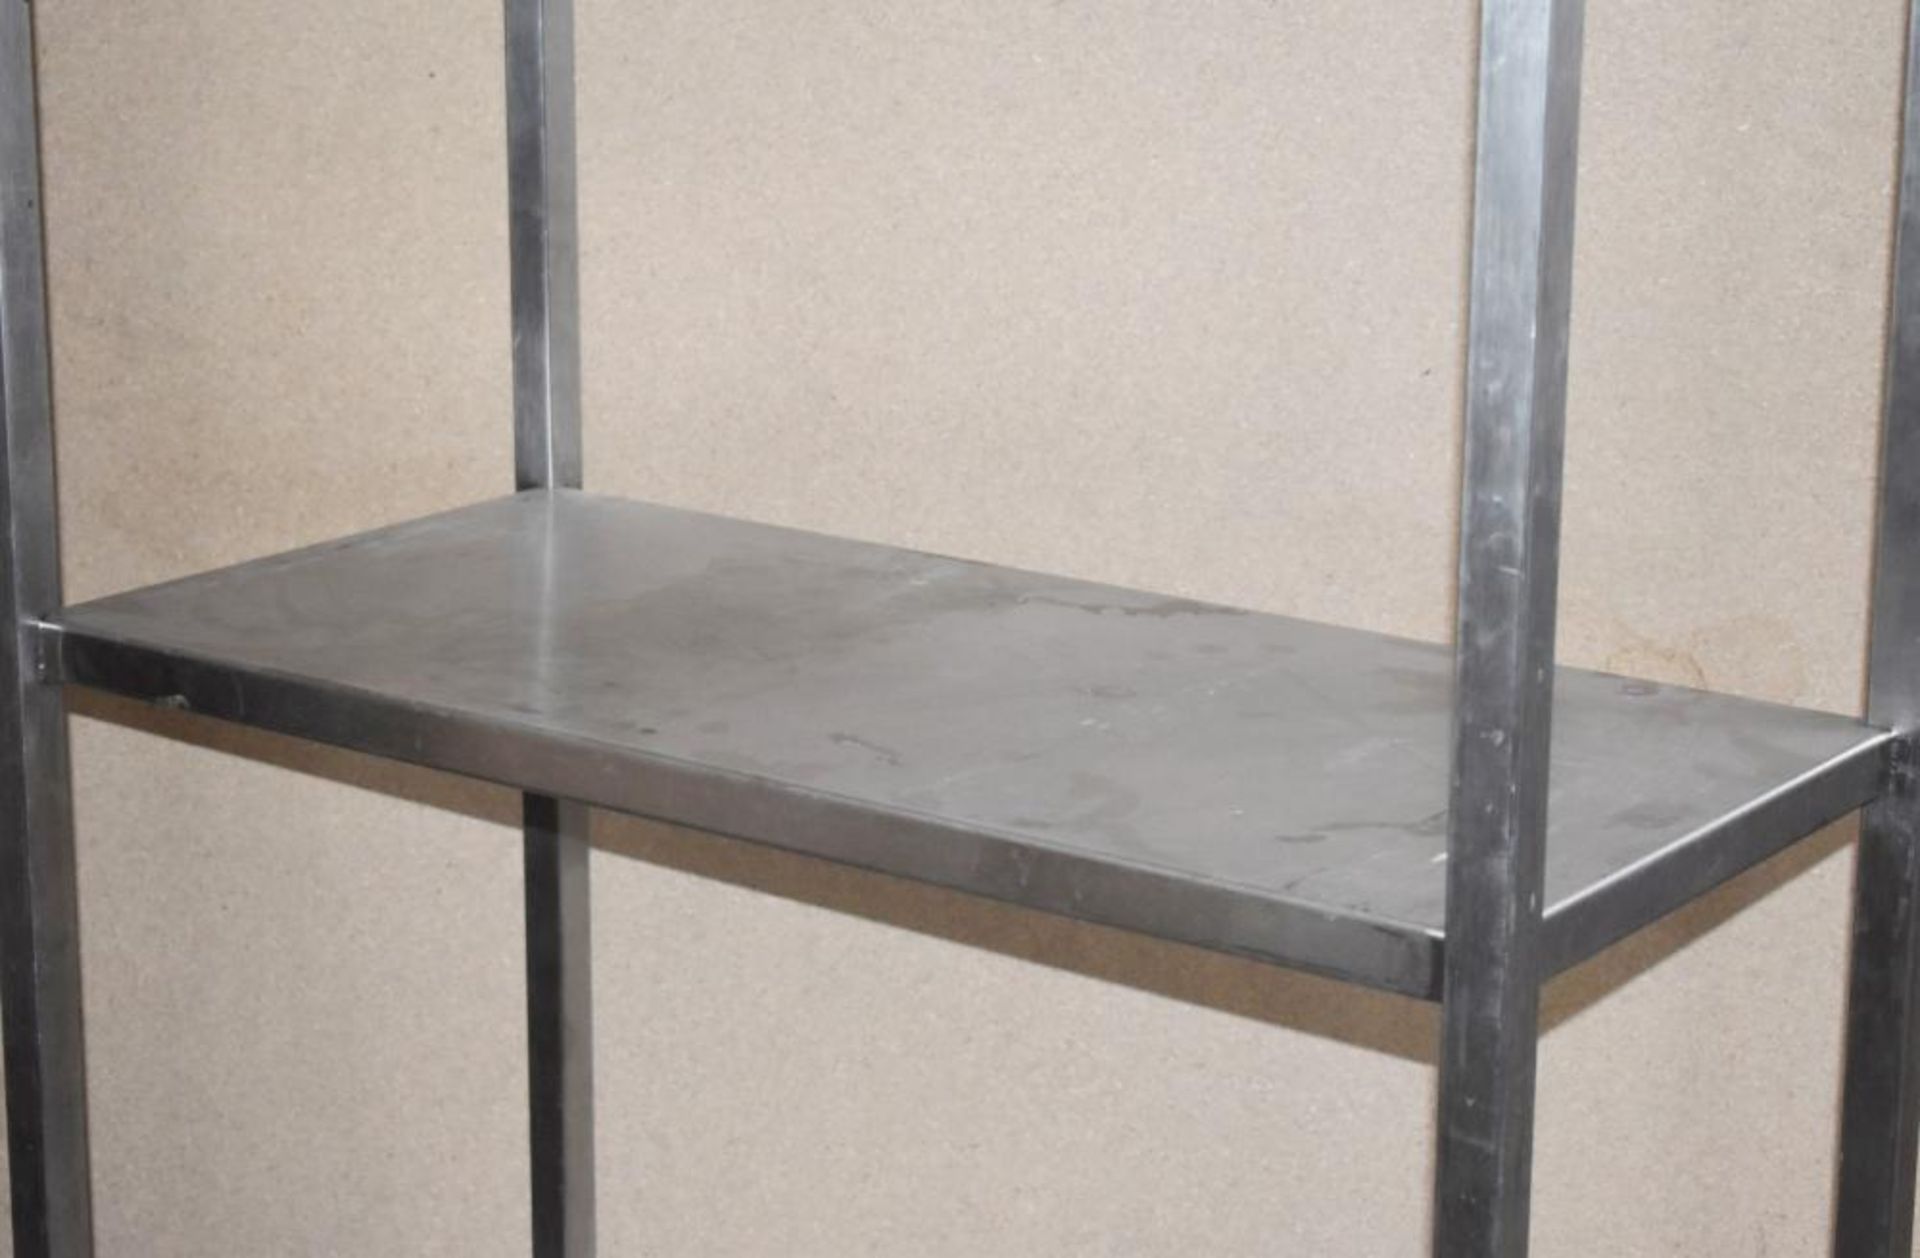 1 x Stainless Steel 2 Tier Mobile Shelf Unit For Commercial Kitchens - H170 x W90 x 45 cms - CL533 - - Image 3 of 3